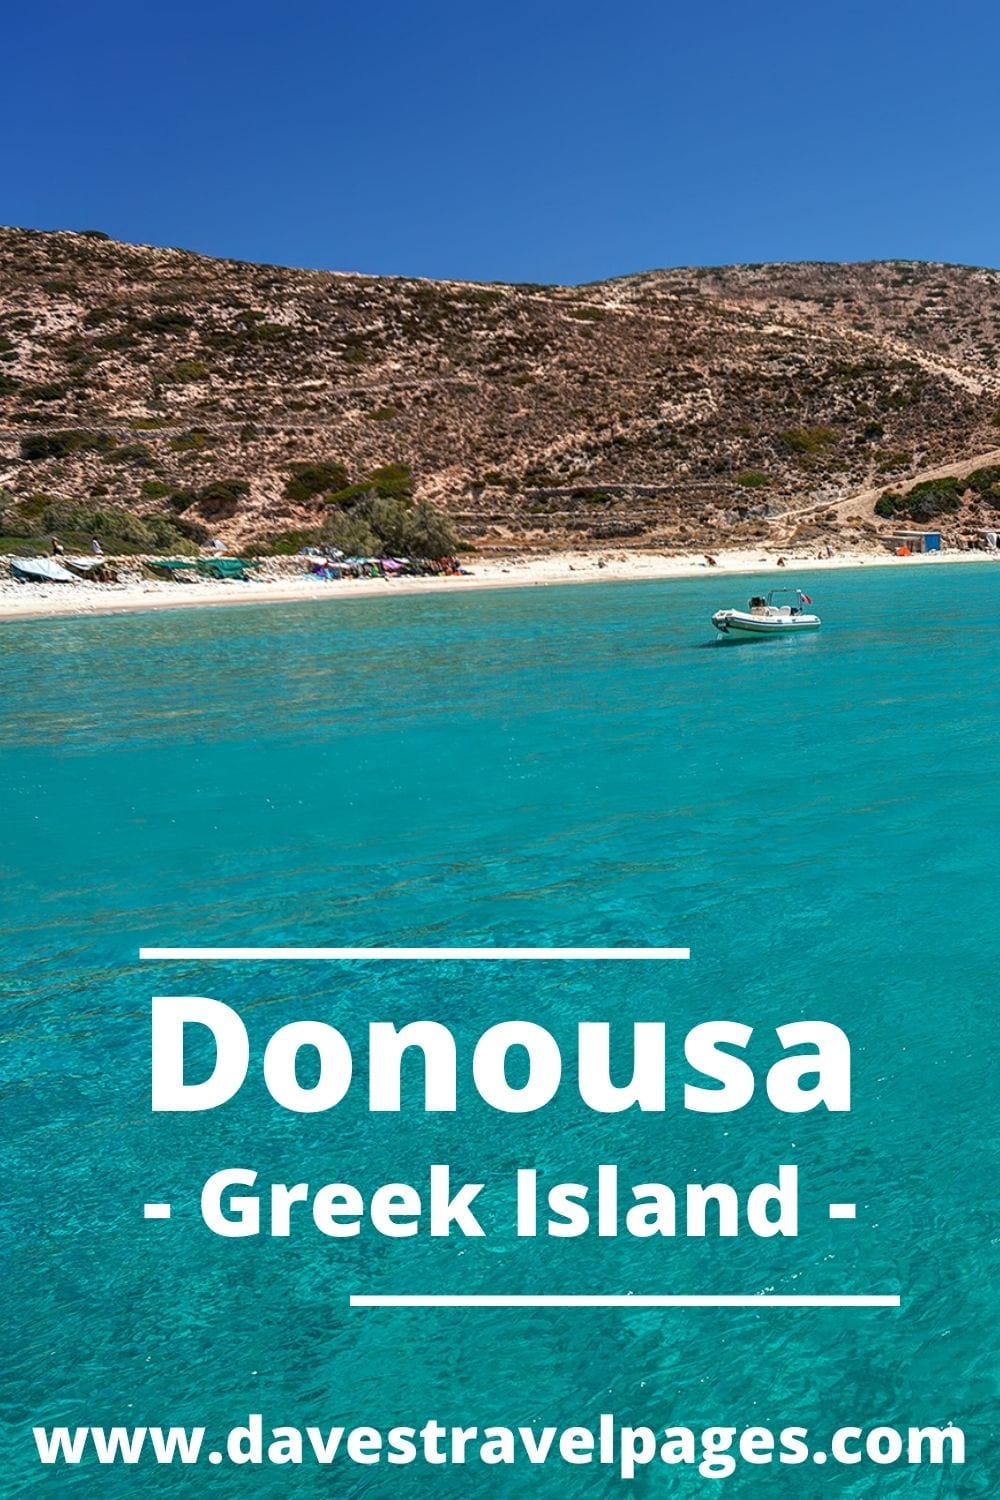 Travel to Donoussa from Mykonos by ferry